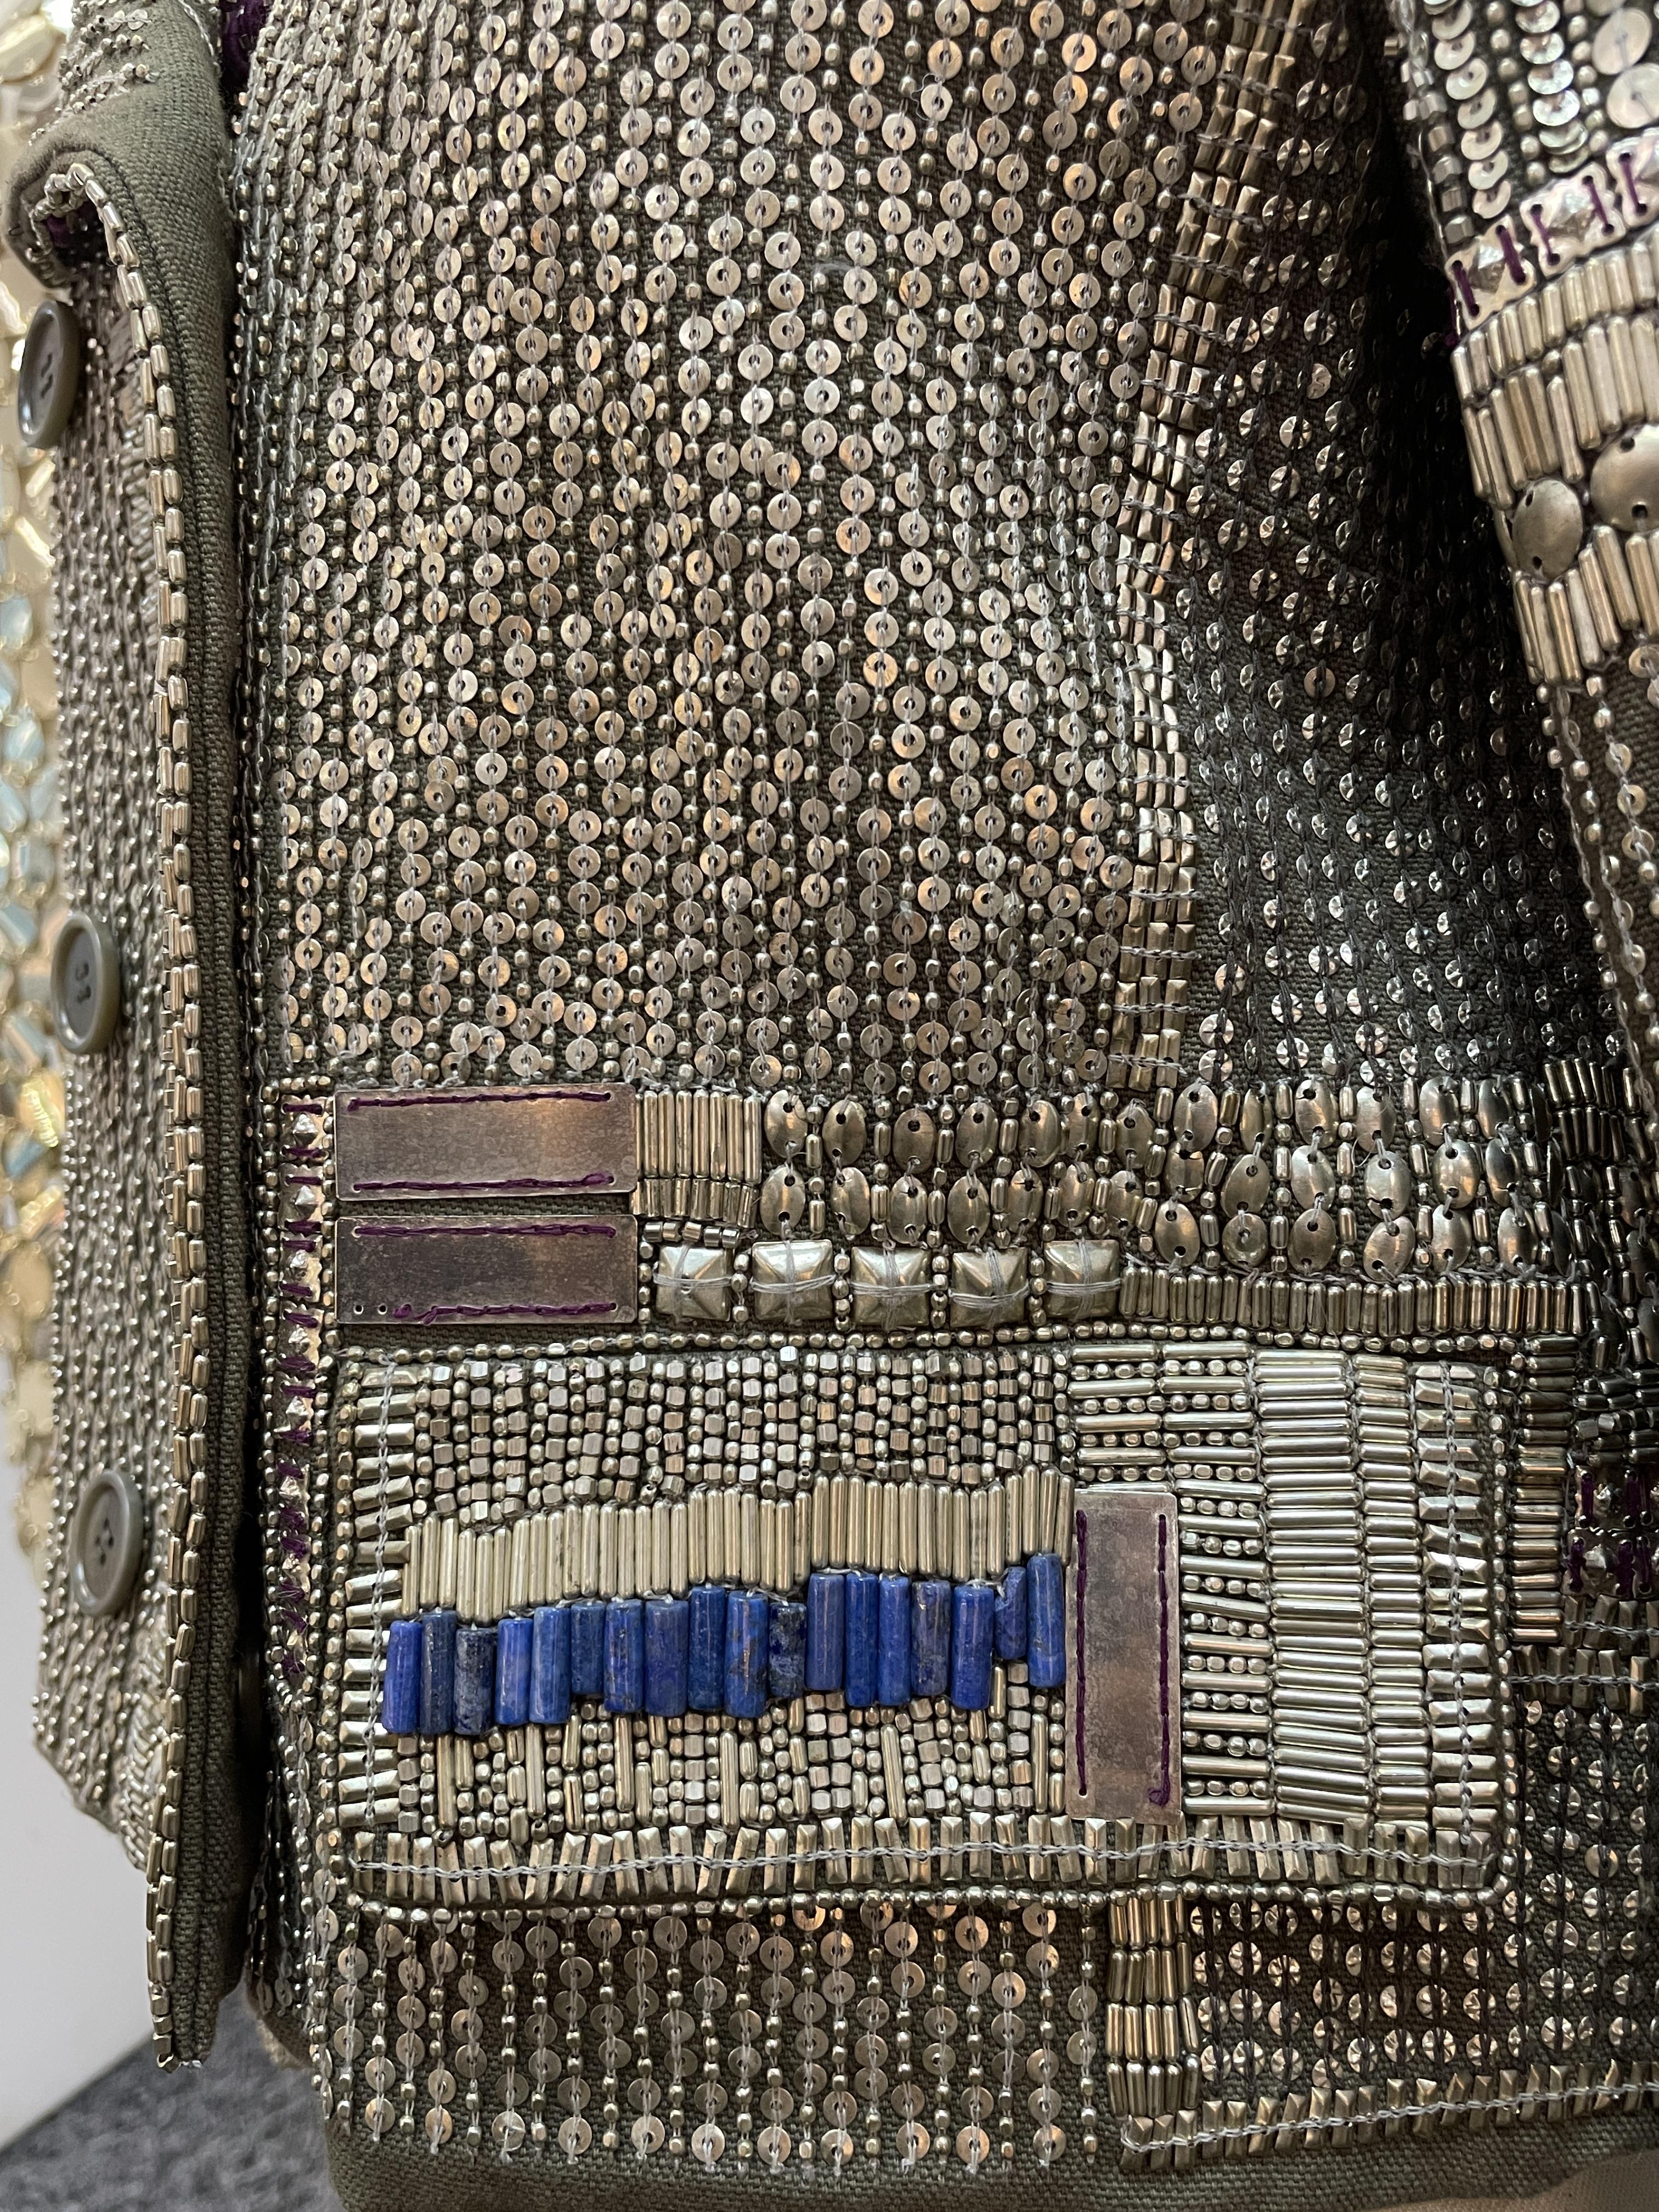 A DRIES VAN NOTEN EMBELLISHED MILITARY JACKET - Image 10 of 13